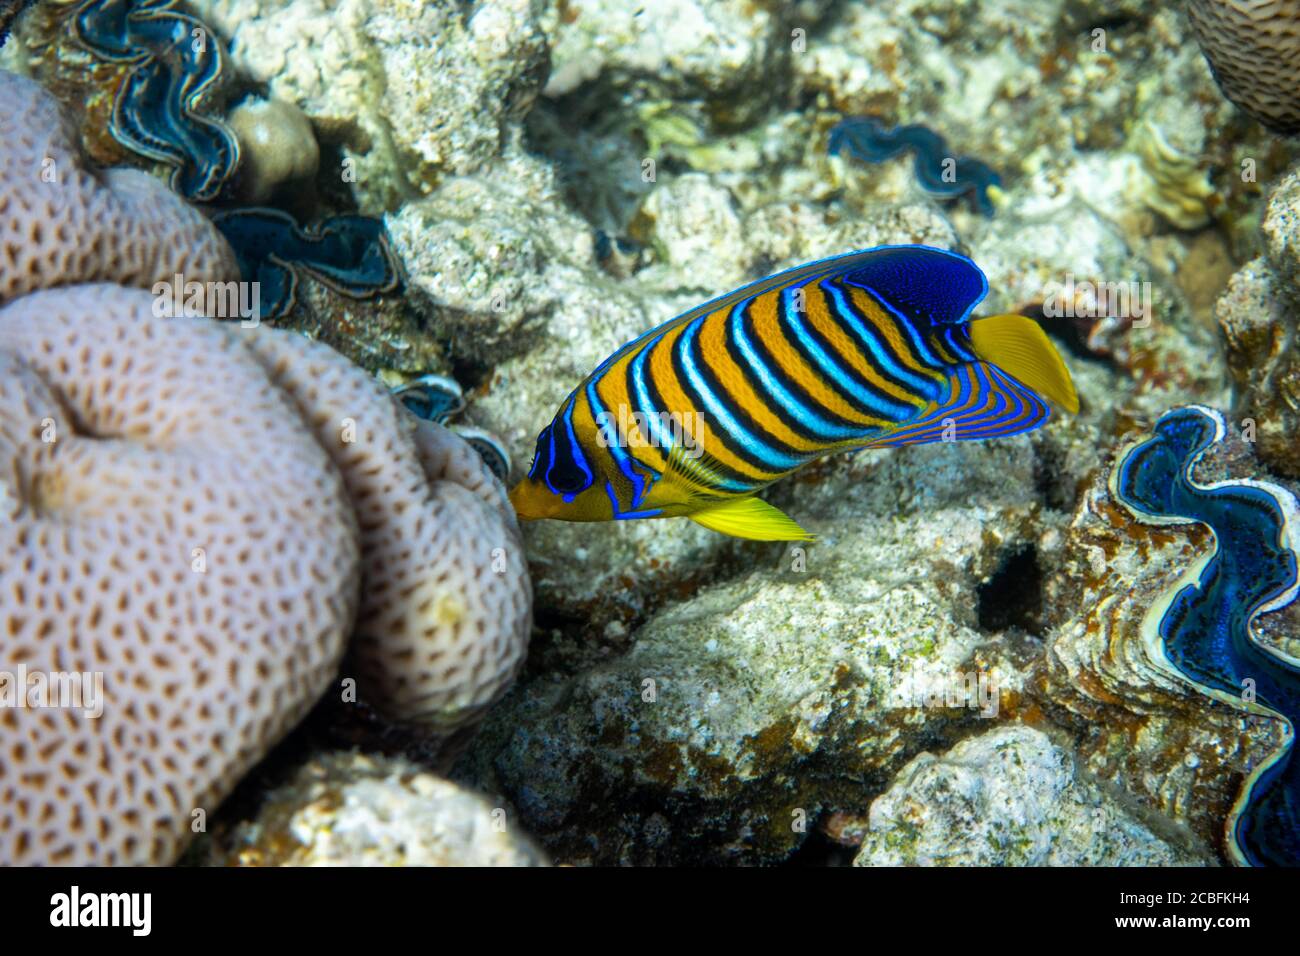 Royal Angelfish (Regal Angel Fish) over a coral reef, Red Sea, Egypt. Tropical colorful orange, white and blue striped fish with yellow fins, in blue Stock Photo